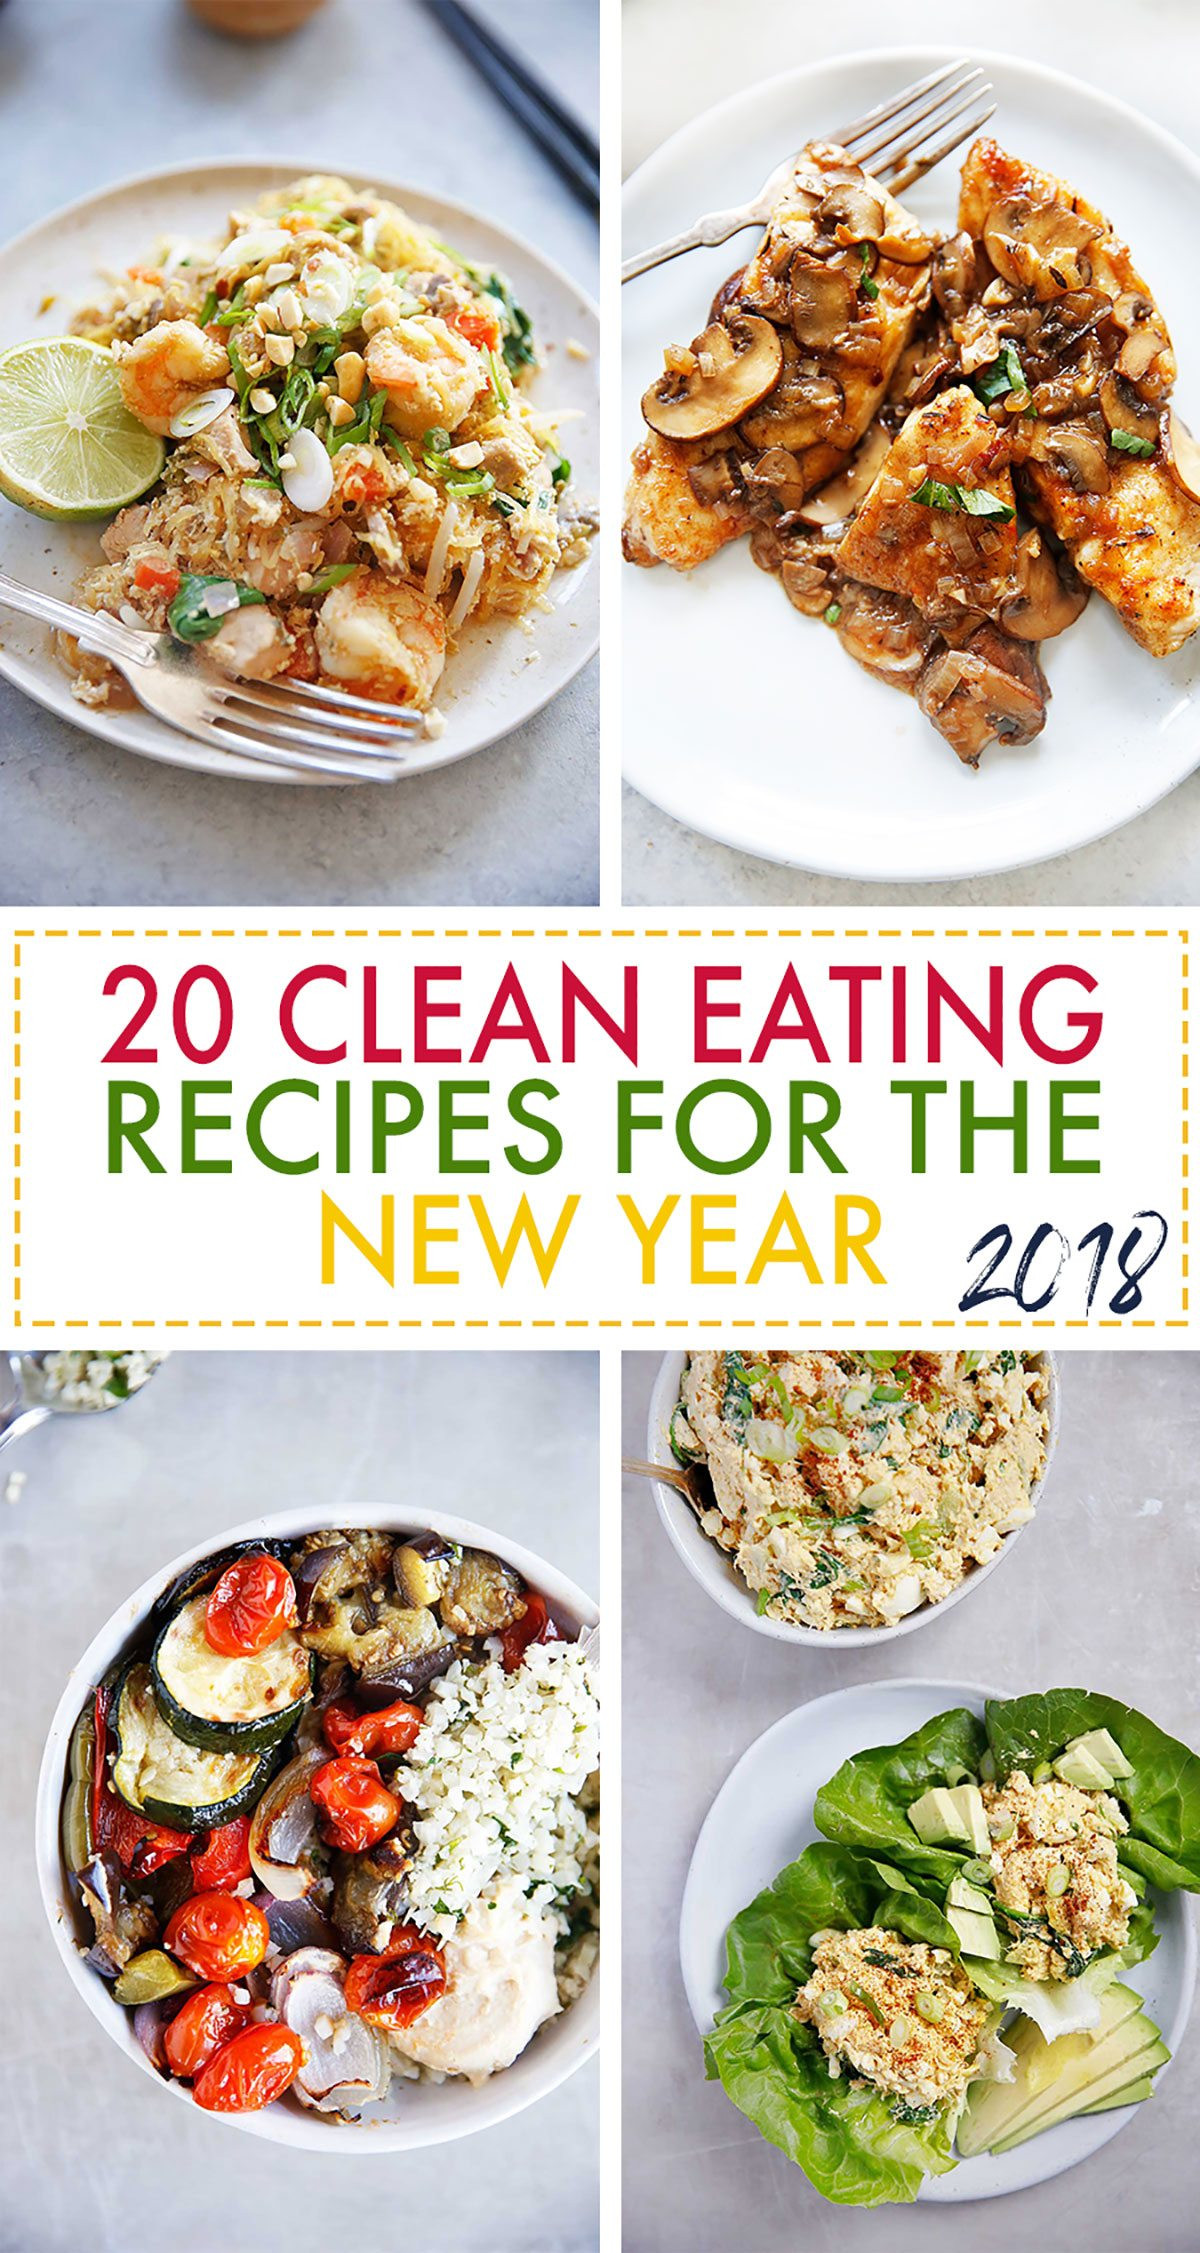 Clean Eating Blogs With Recipes
 20 Clean Eating Recipes for 2018 Lexi s Clean Kitchen